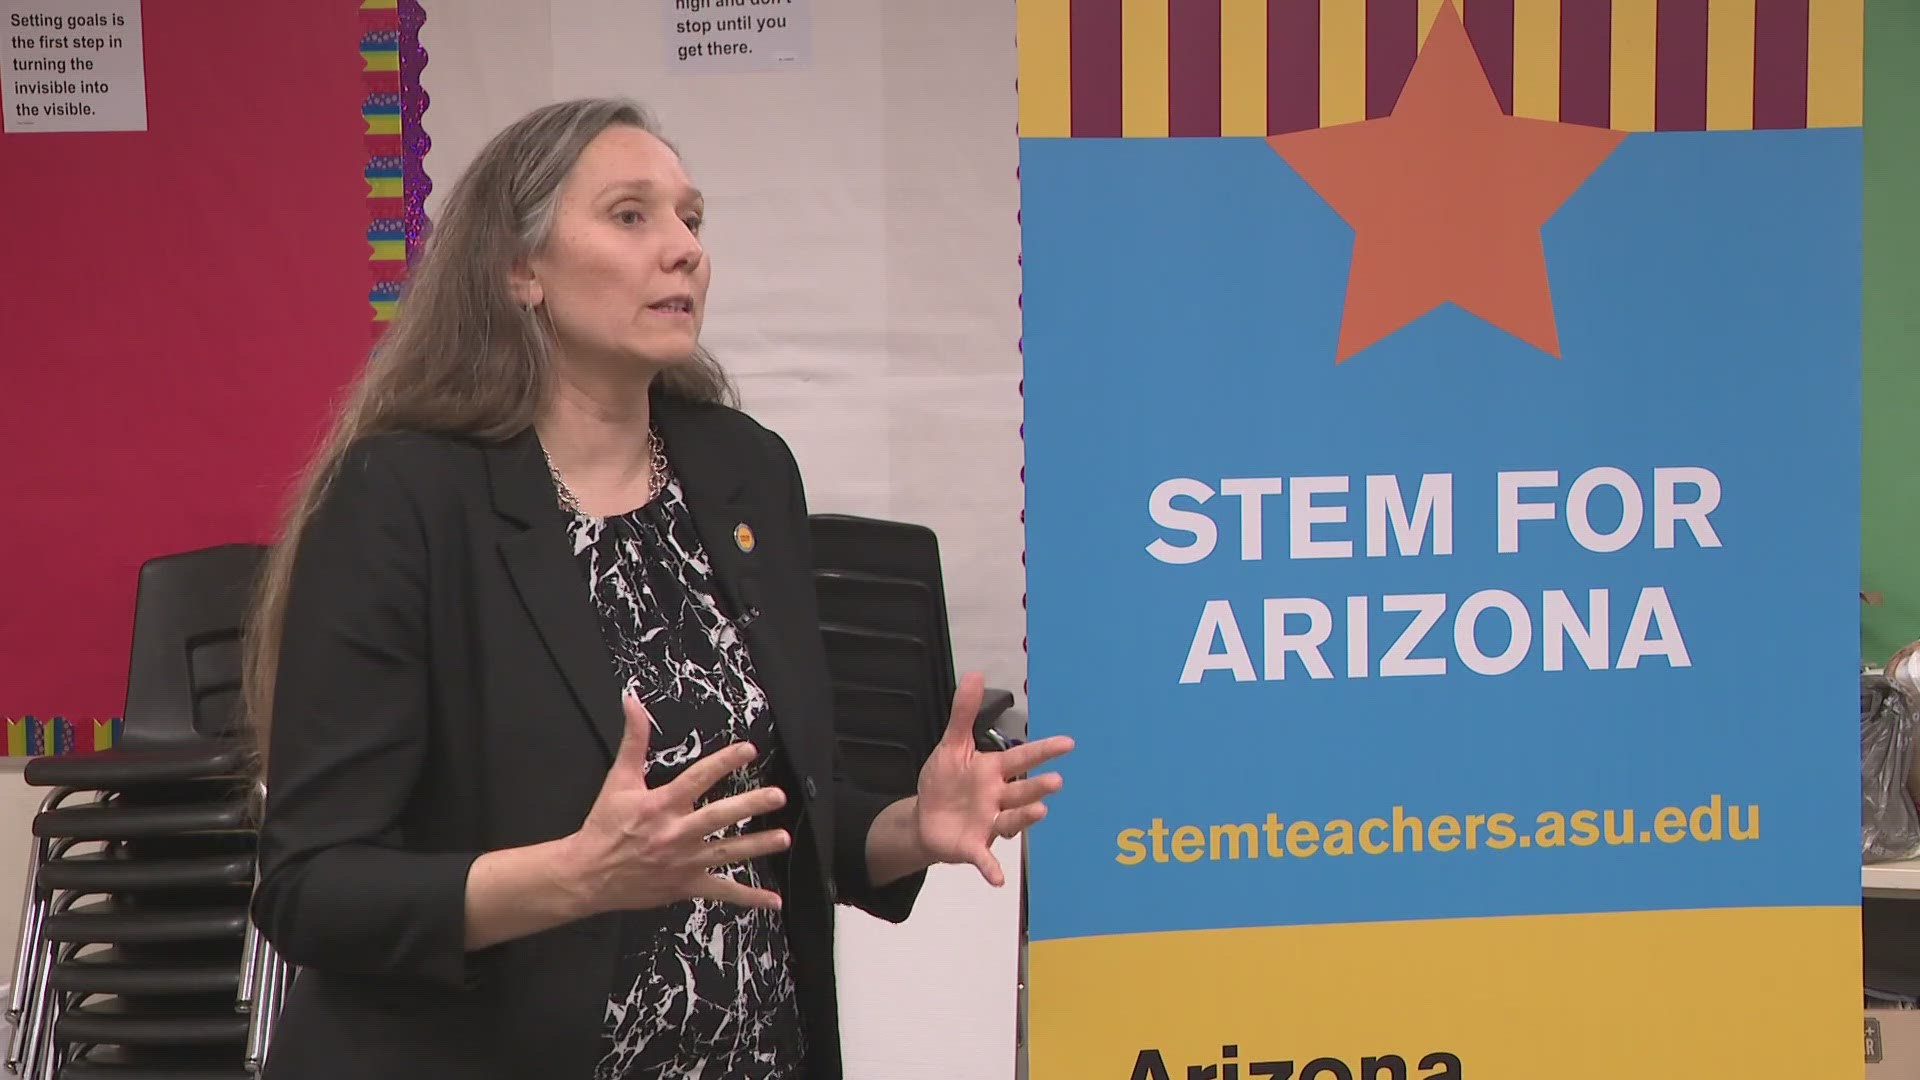 There is concern that students in Arizona are not getting the necessary skills to compete for STEM jobs.